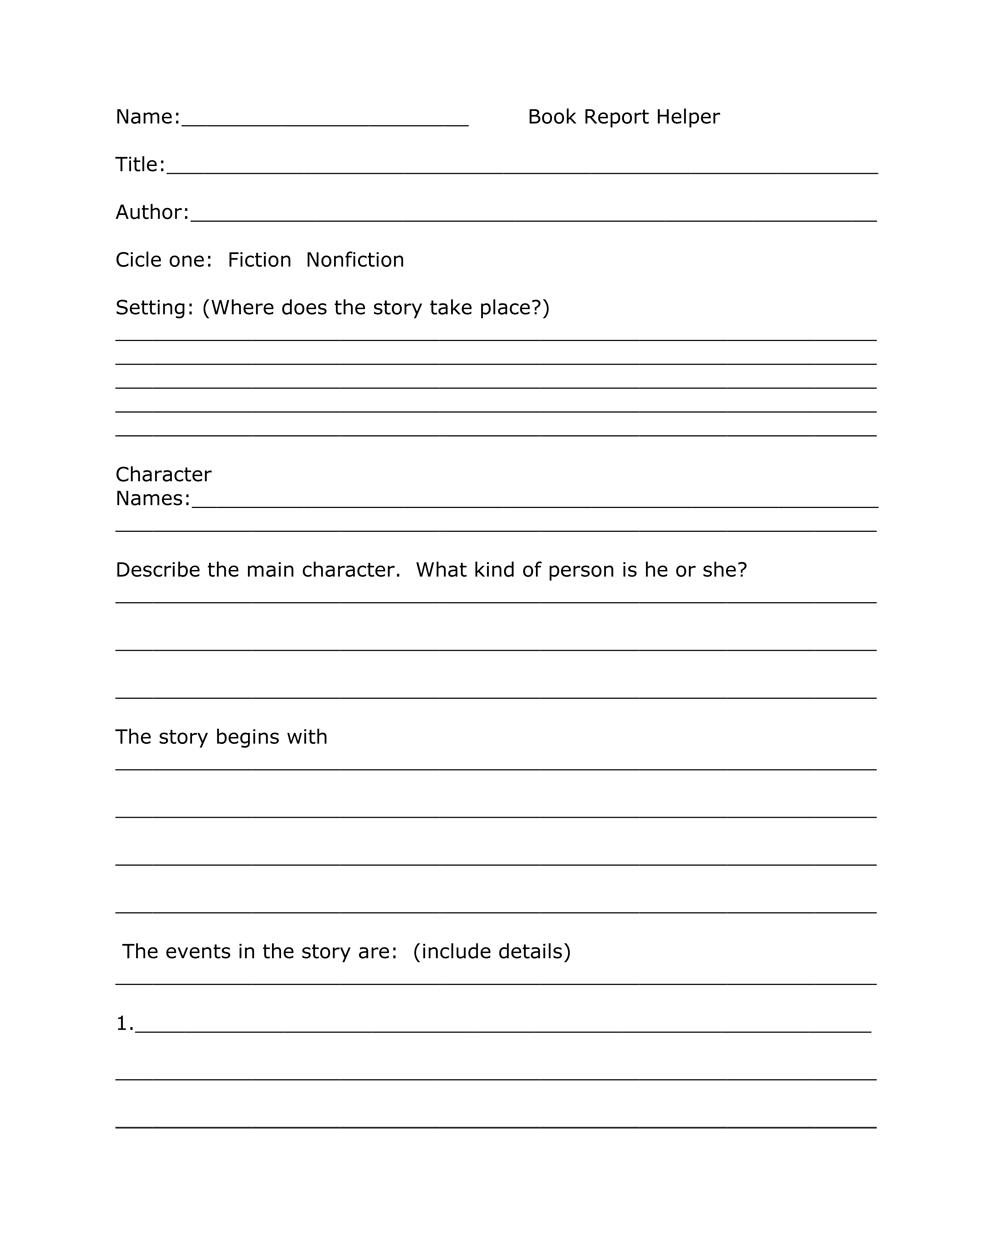 Book Report Templates From Custom Writing Service Throughout Story Report Template